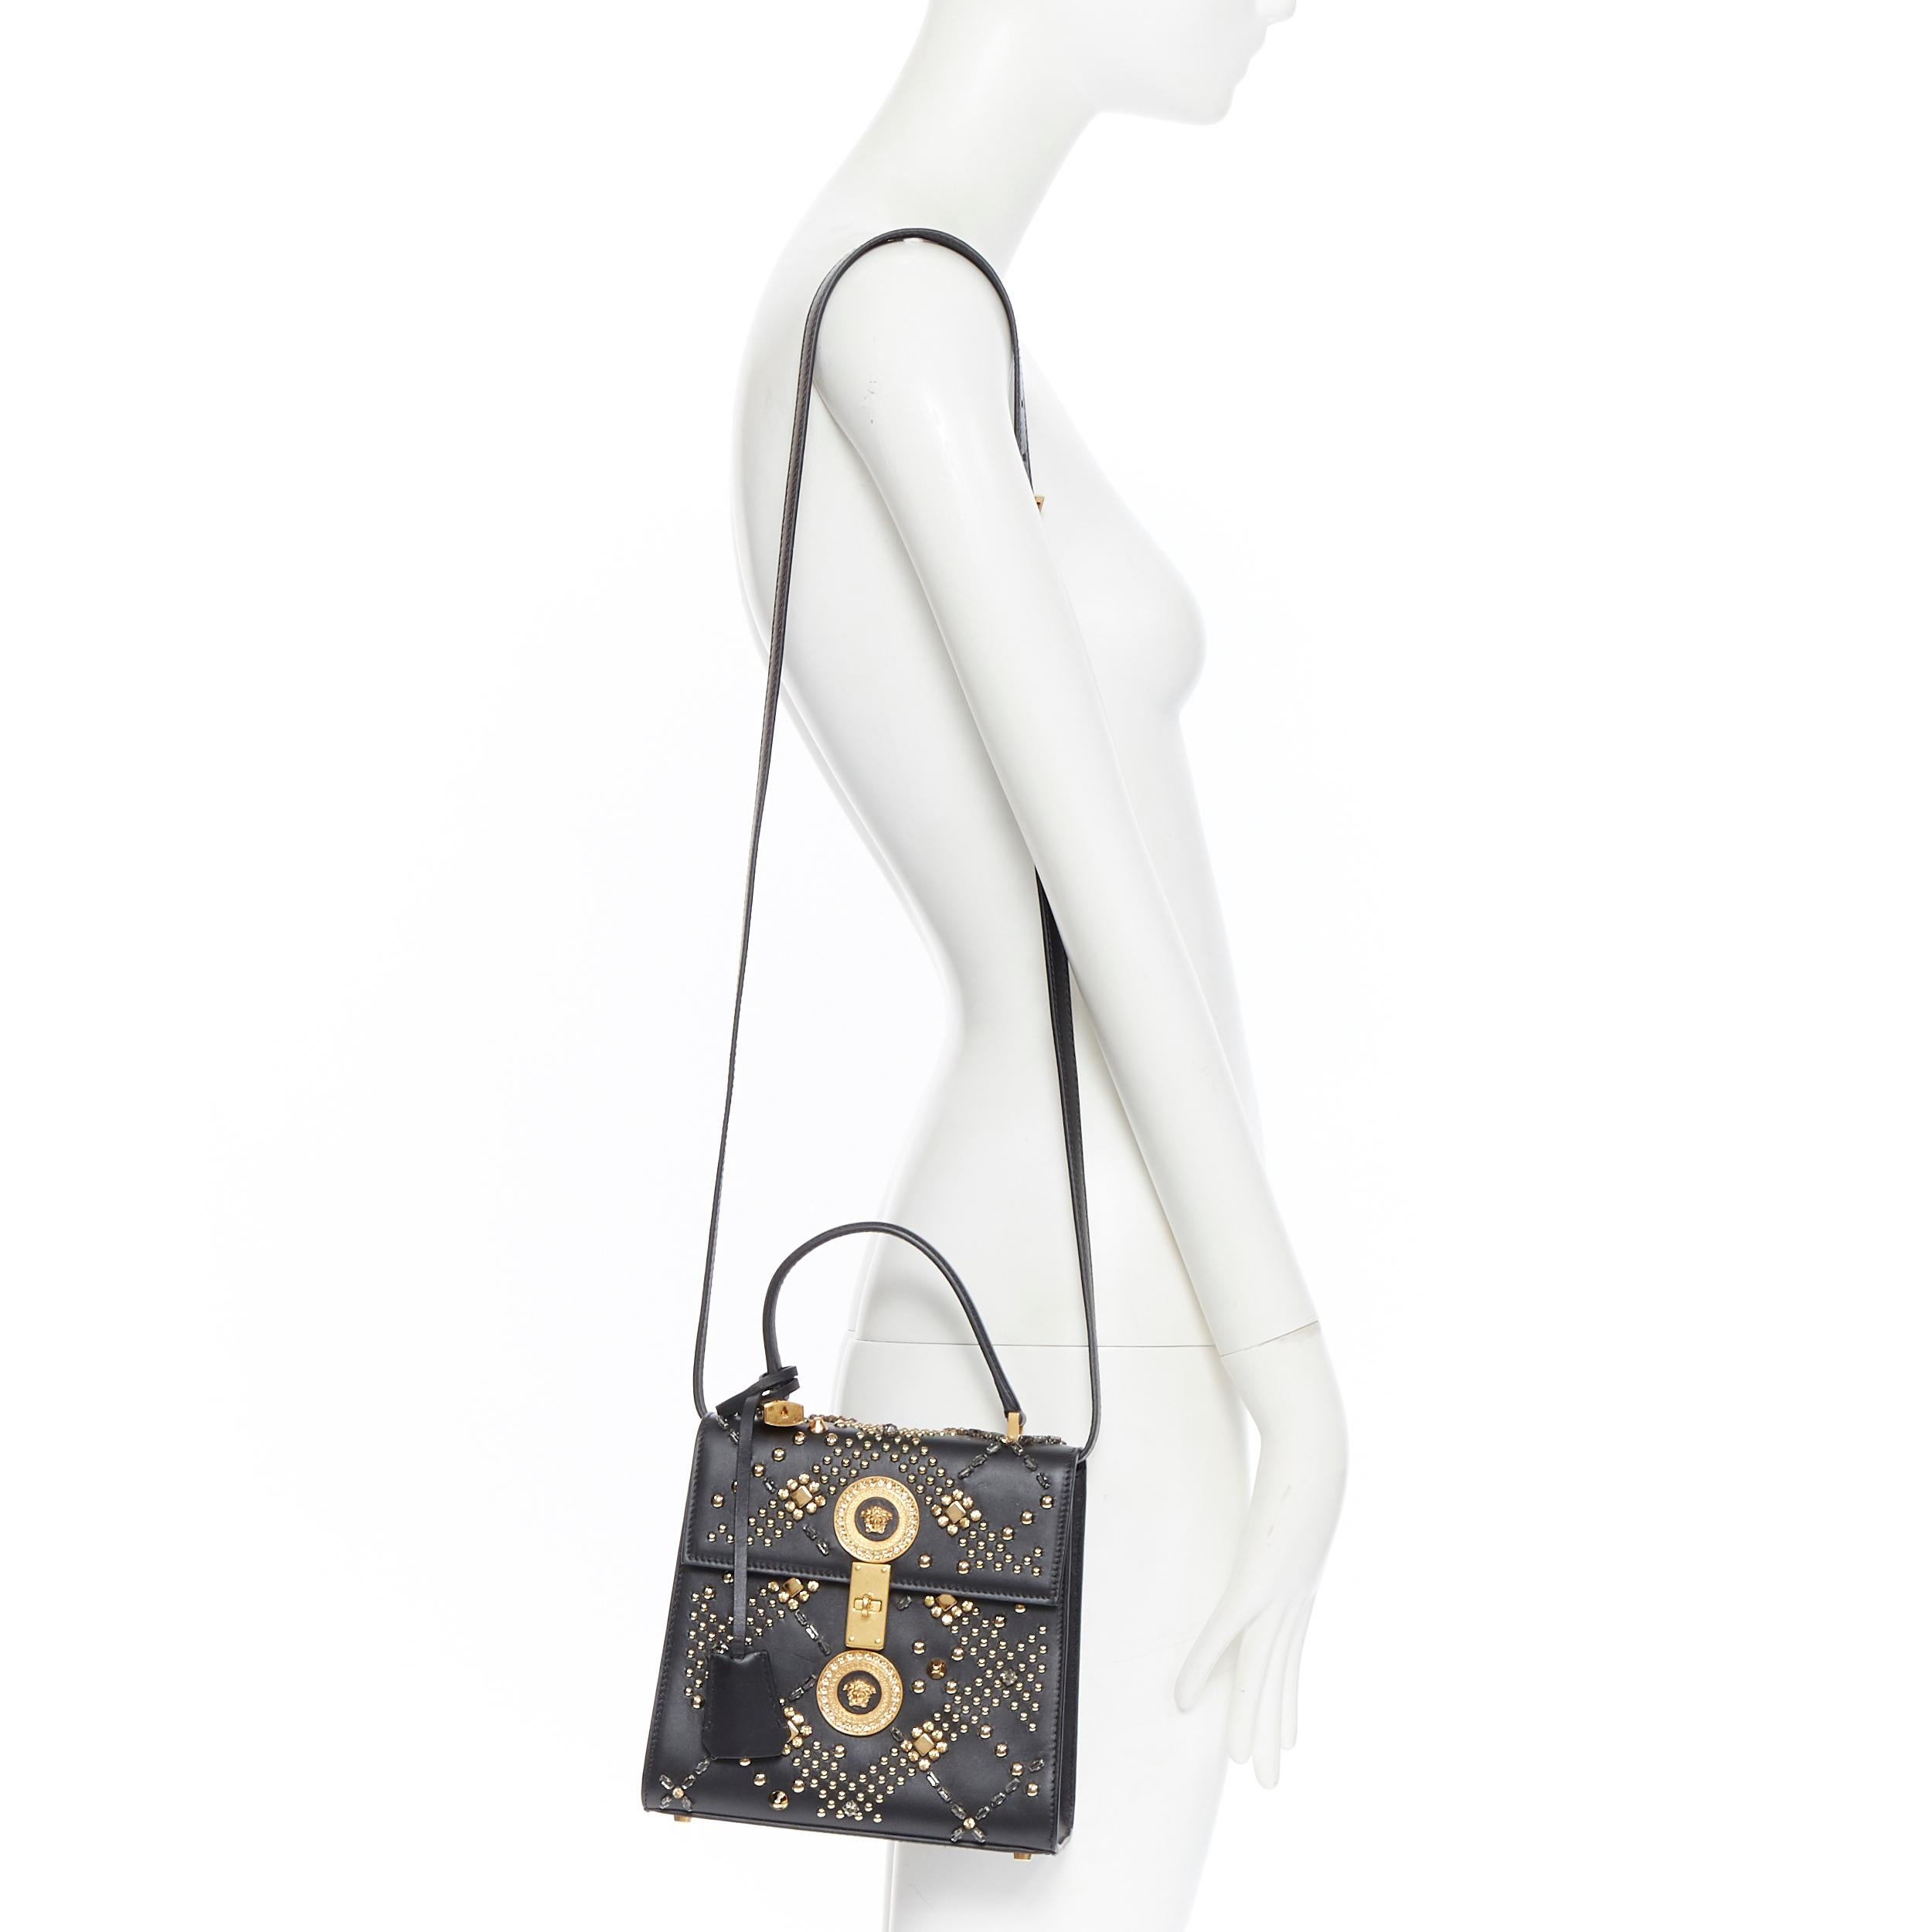 new VERSACE Tribute Icon 1993 black calfskin crystal stud Medusa flap kelly bag
Brand: Versace
Designer: Donatella Versace
Collection: Spring Summer 2018
Model Name / Style: Tribute bag
Material: Leather
Color: Black
Pattern: Other
Closure: